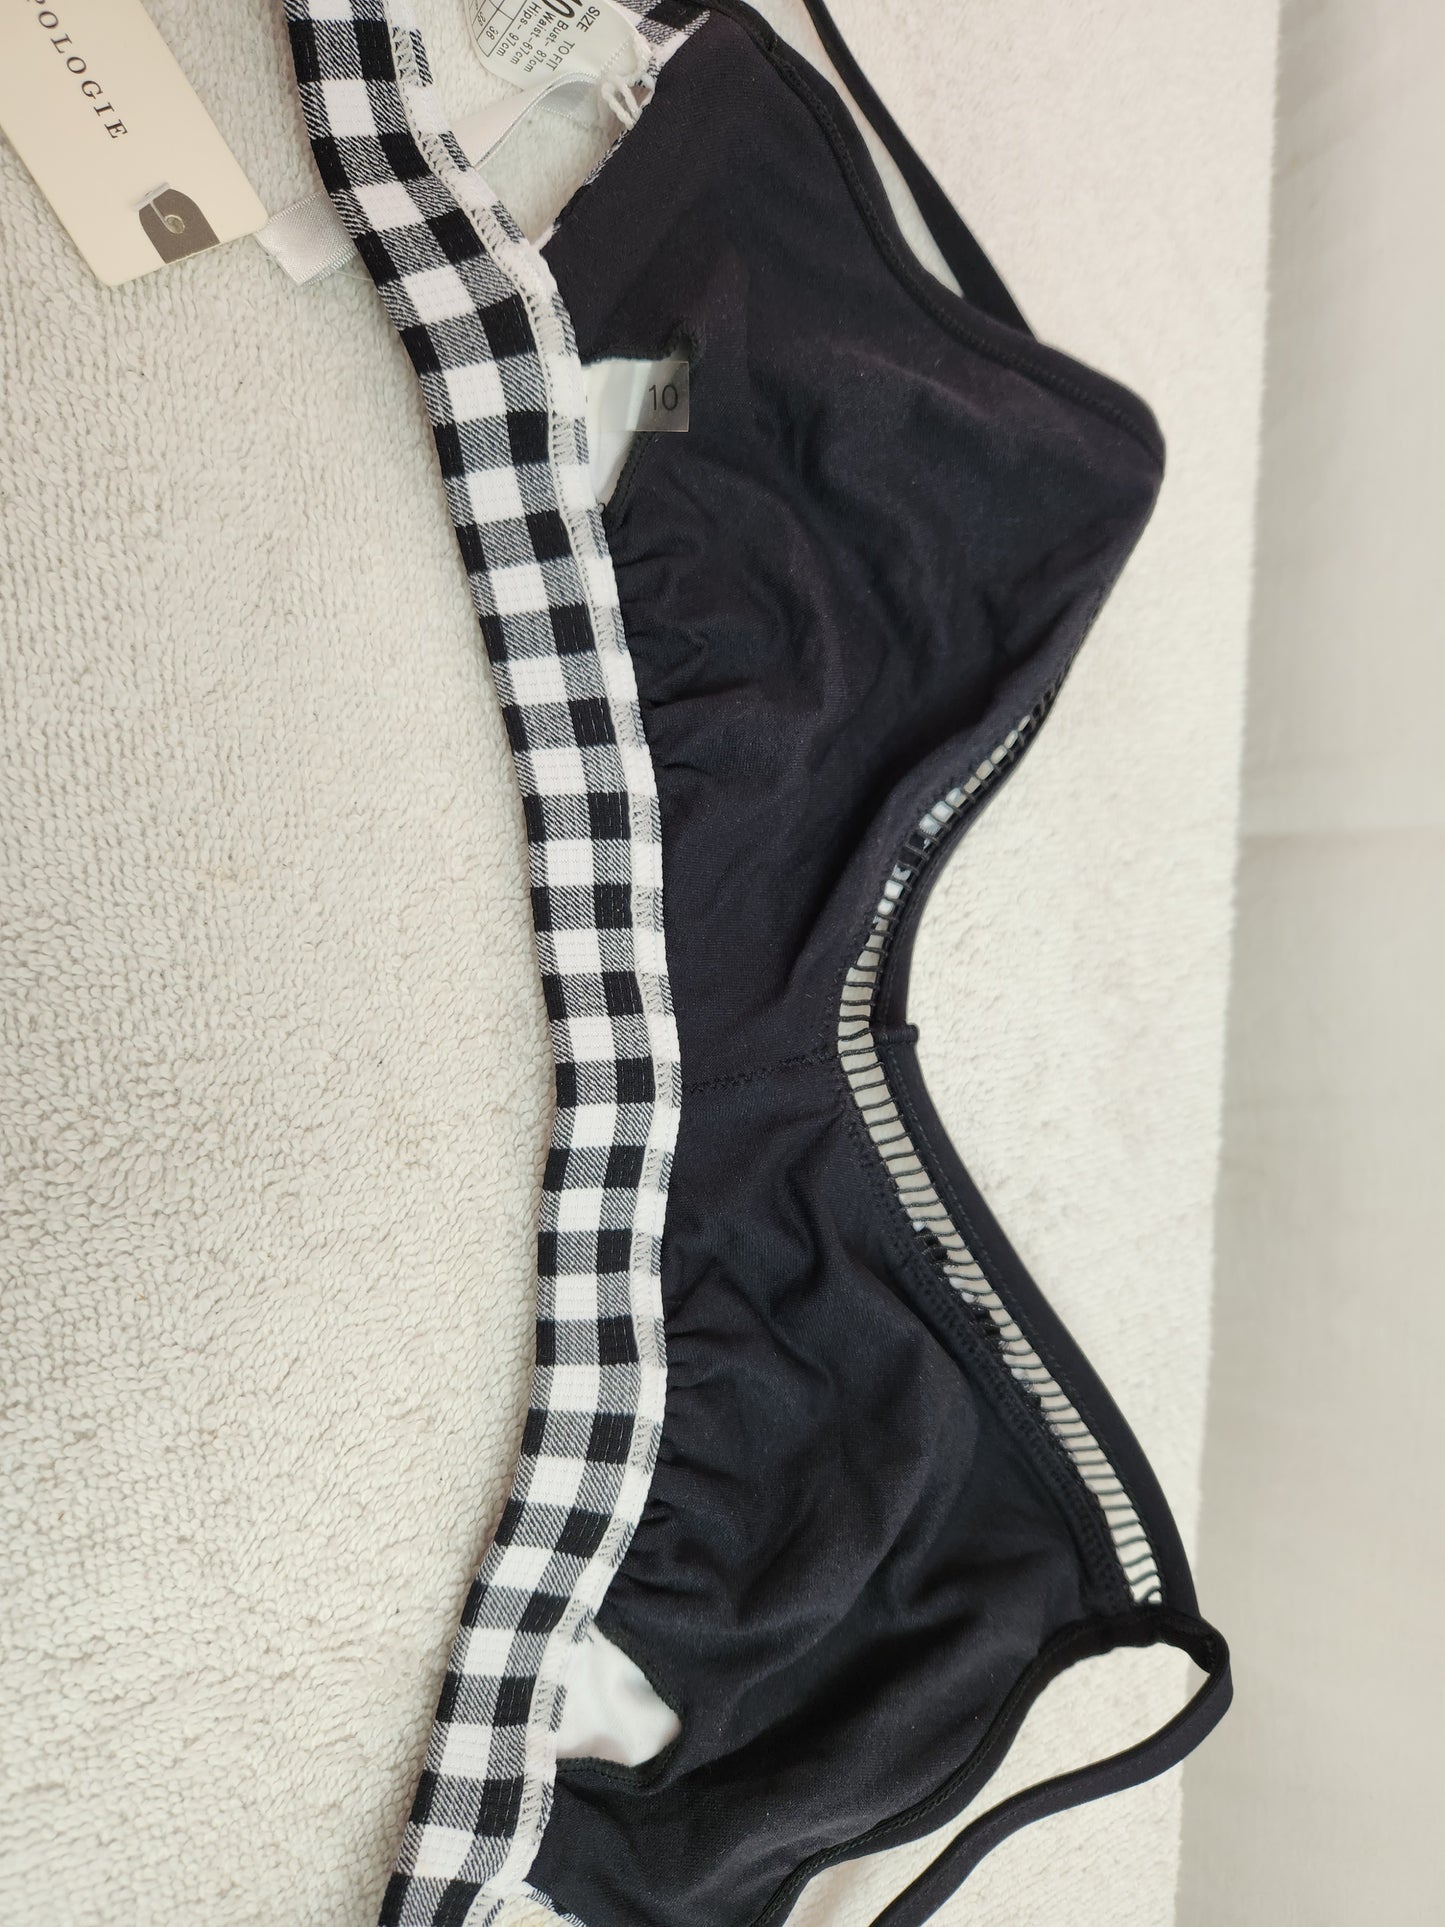 NWT - ANTHROPOLOGIE Seafolly Black White ChecK Swimsuit Top - US 6